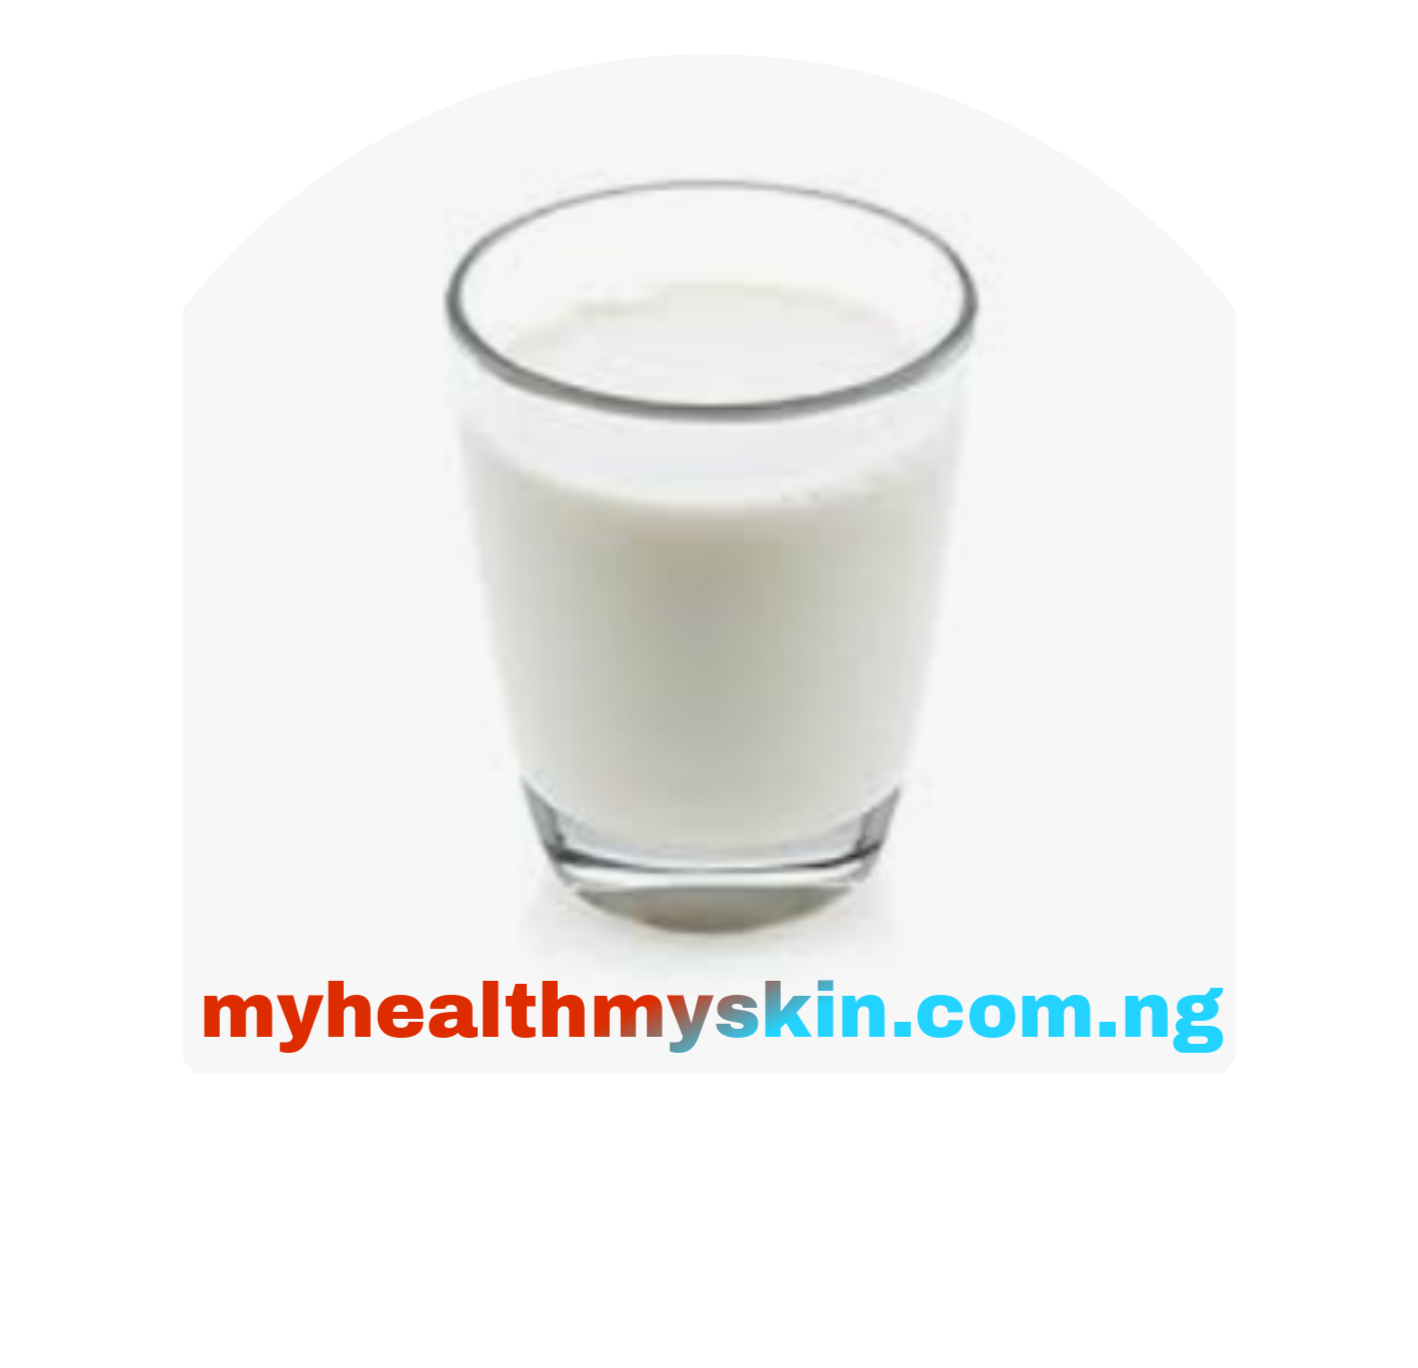 Benefits of cloves and milk